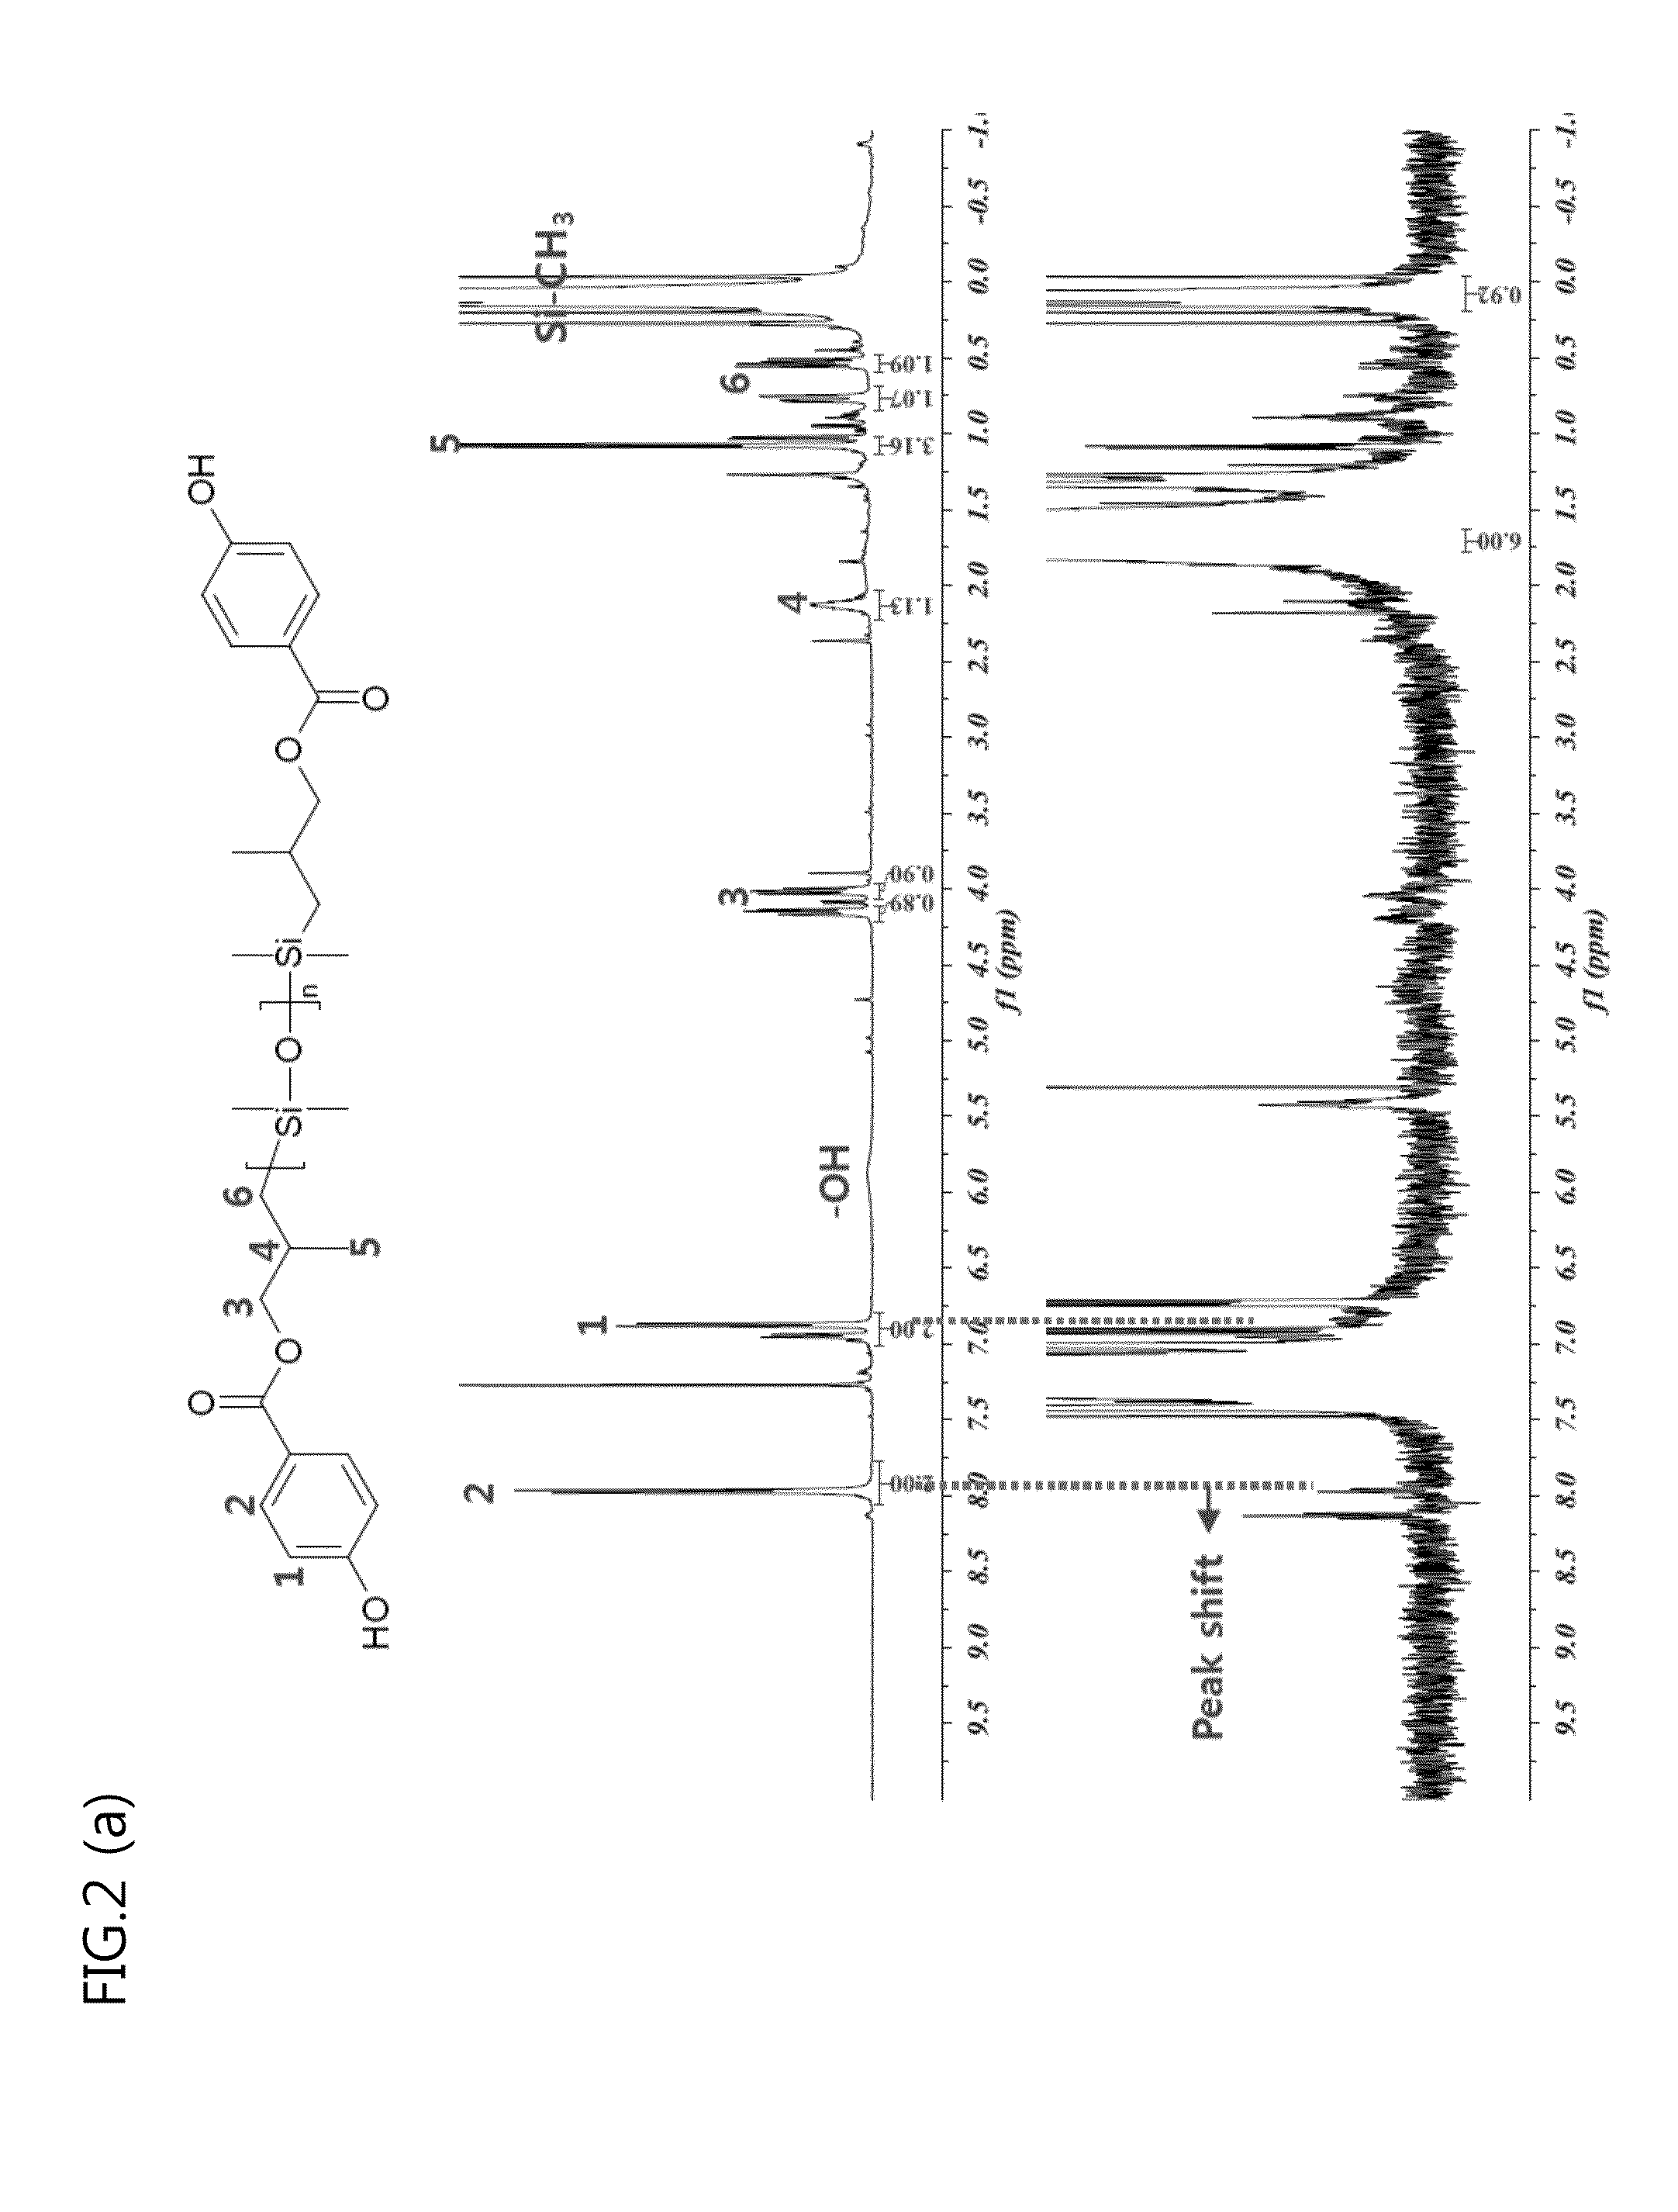 Polyorganosiloxane compound, method for preparing the same, and copolycarbonate resin comprising the same